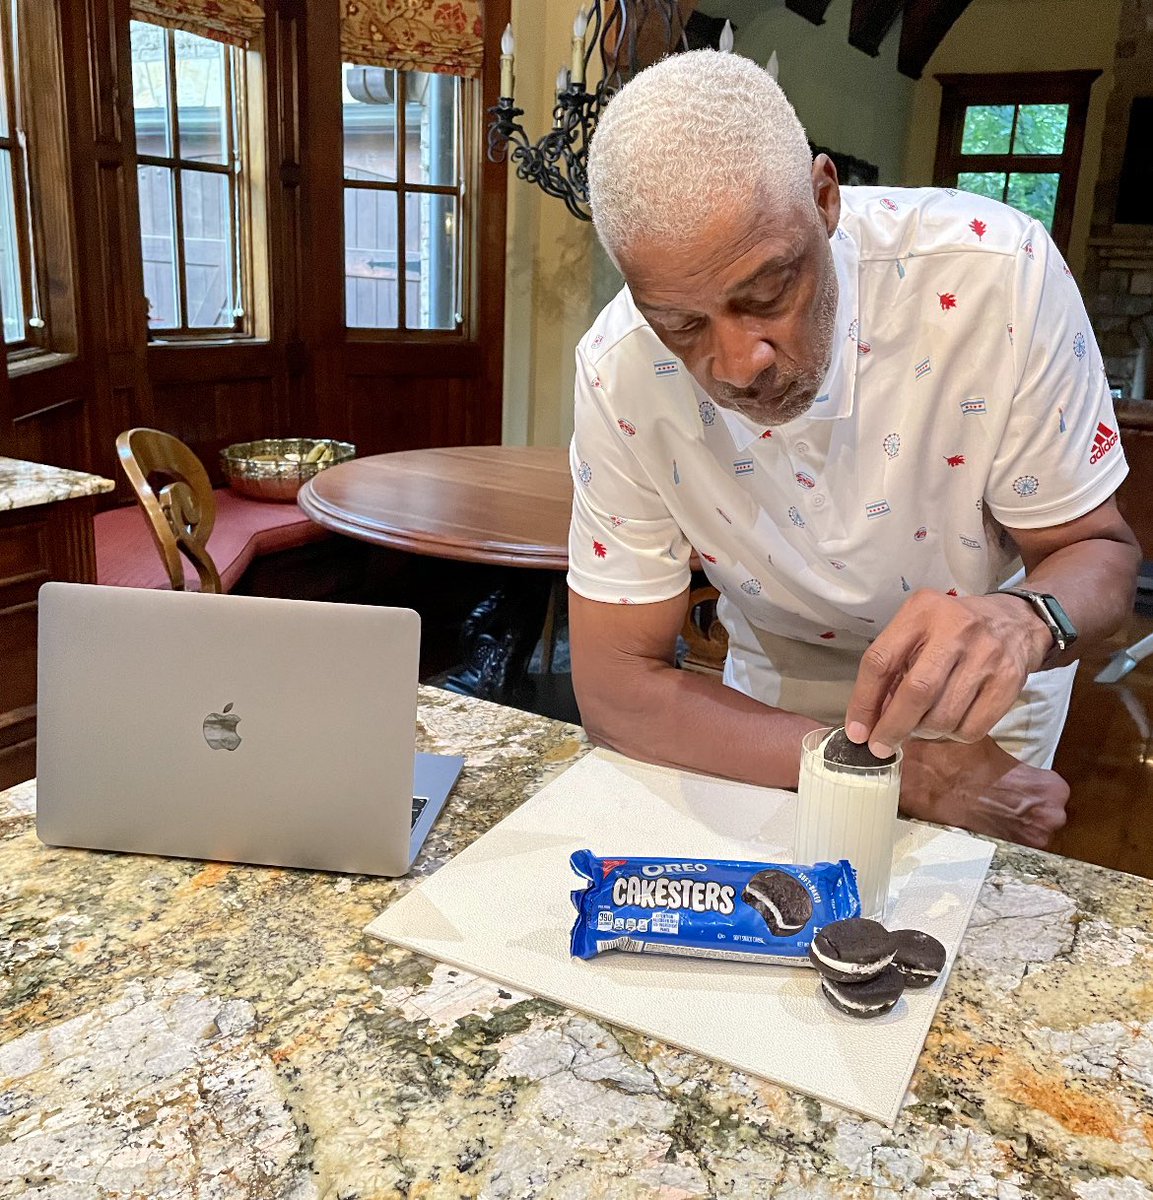 @therea1djones Reading up on the draft picks and looking forward to seeing who is joining the brotherhood. As I'm dunking my @OREO, I can't help but wonder who will become the next great dunker. Make sure to pick up your #snackingMVPs from your local convenience store today! #ad